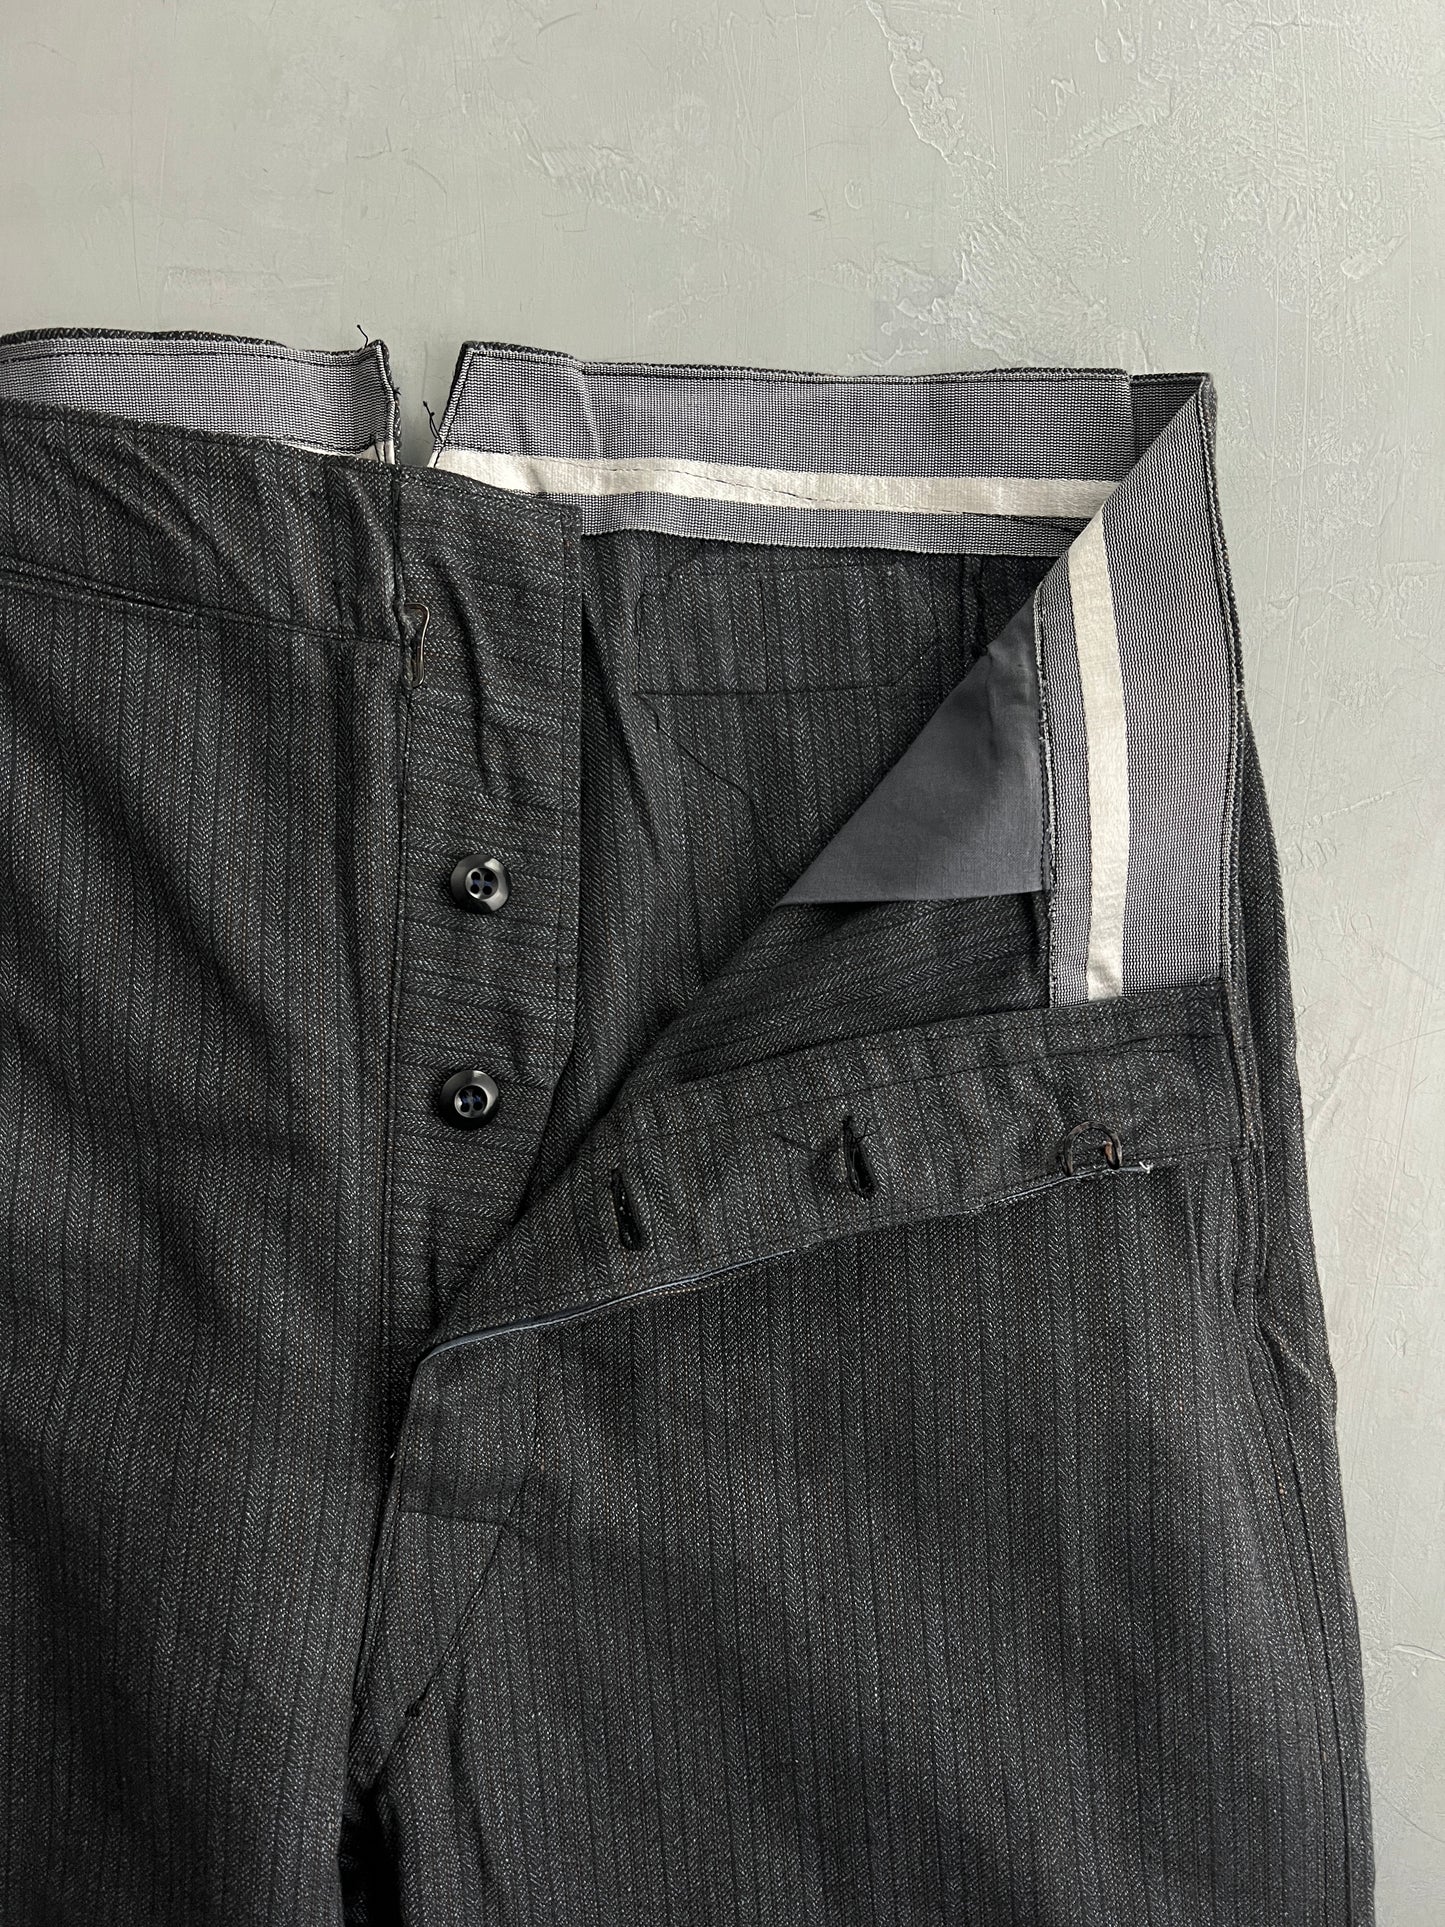 Deadstock French Buckle Back Work Pants [35"]